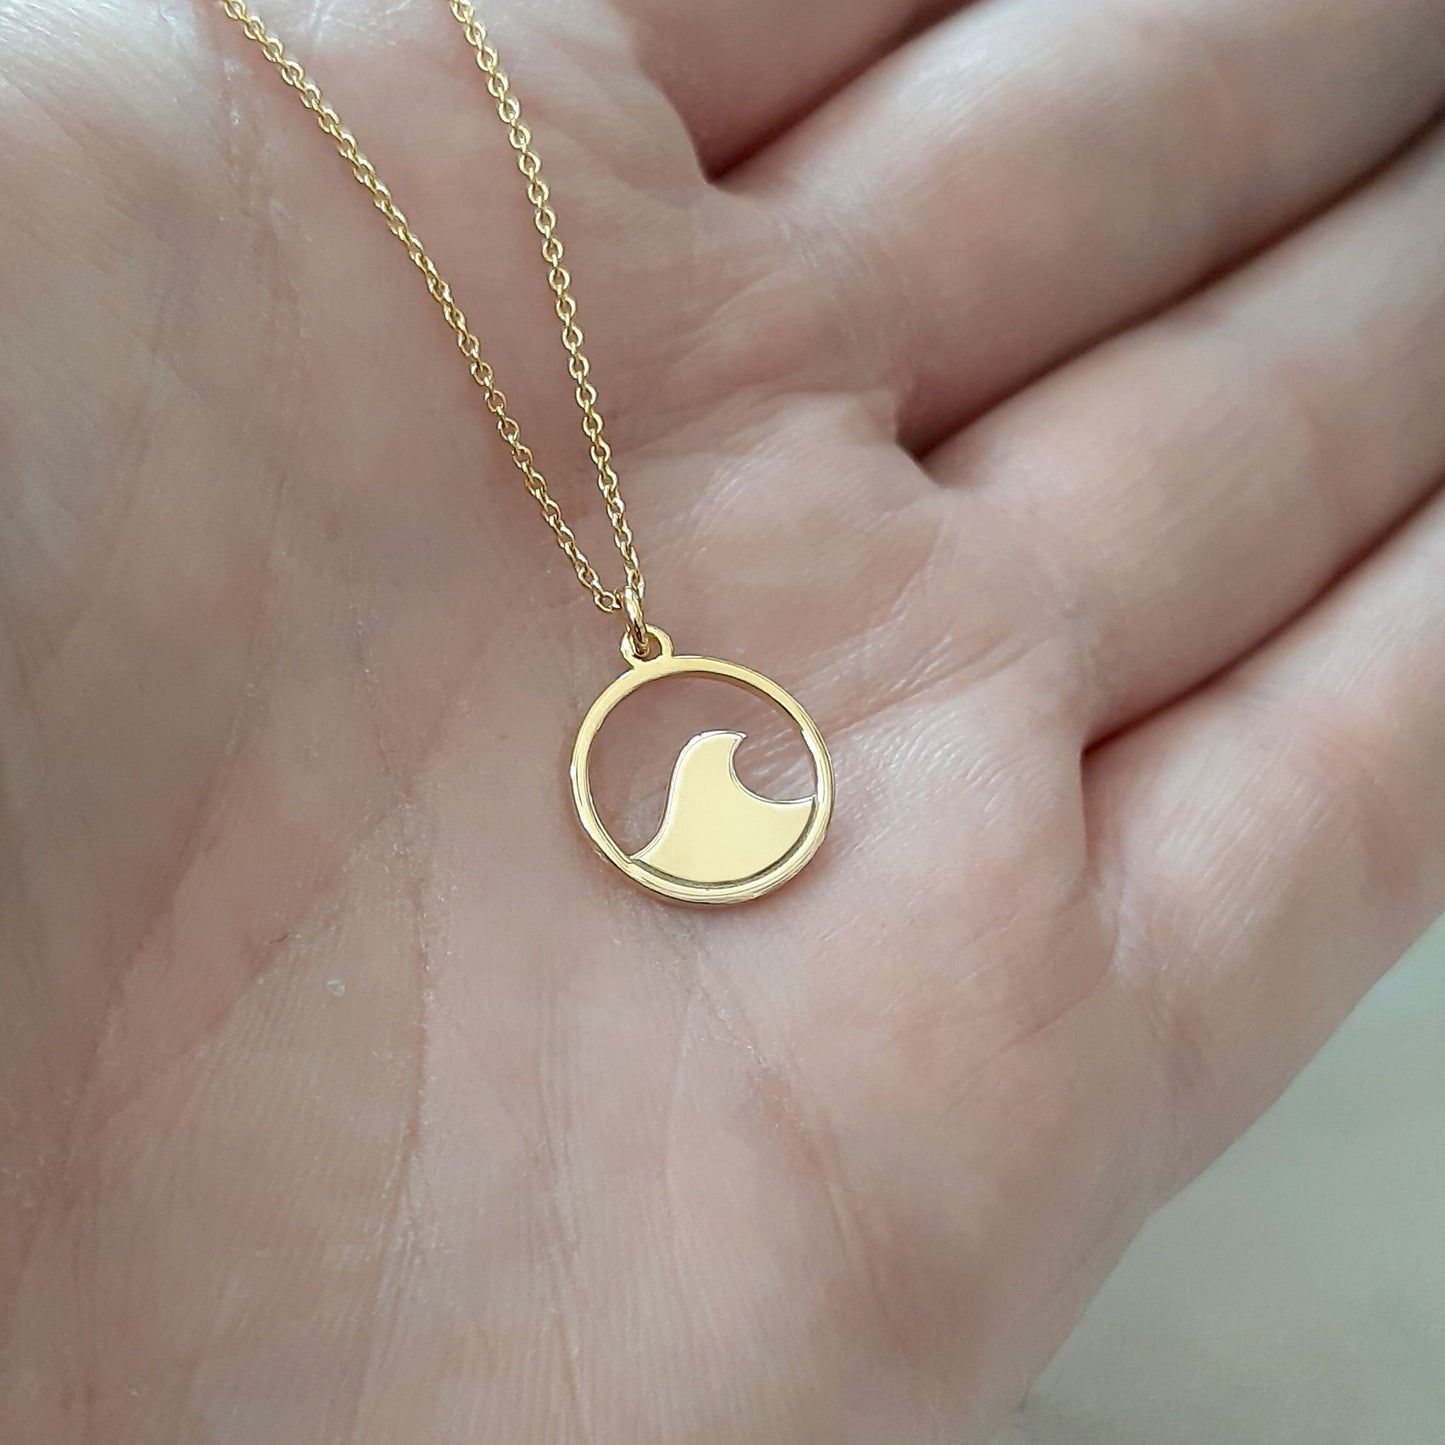 Real 14k Solid Gold Minimal Sea wave Necklace , nautical gold jewelry , necklace for women, 14k gold necklace personalized pendant gift